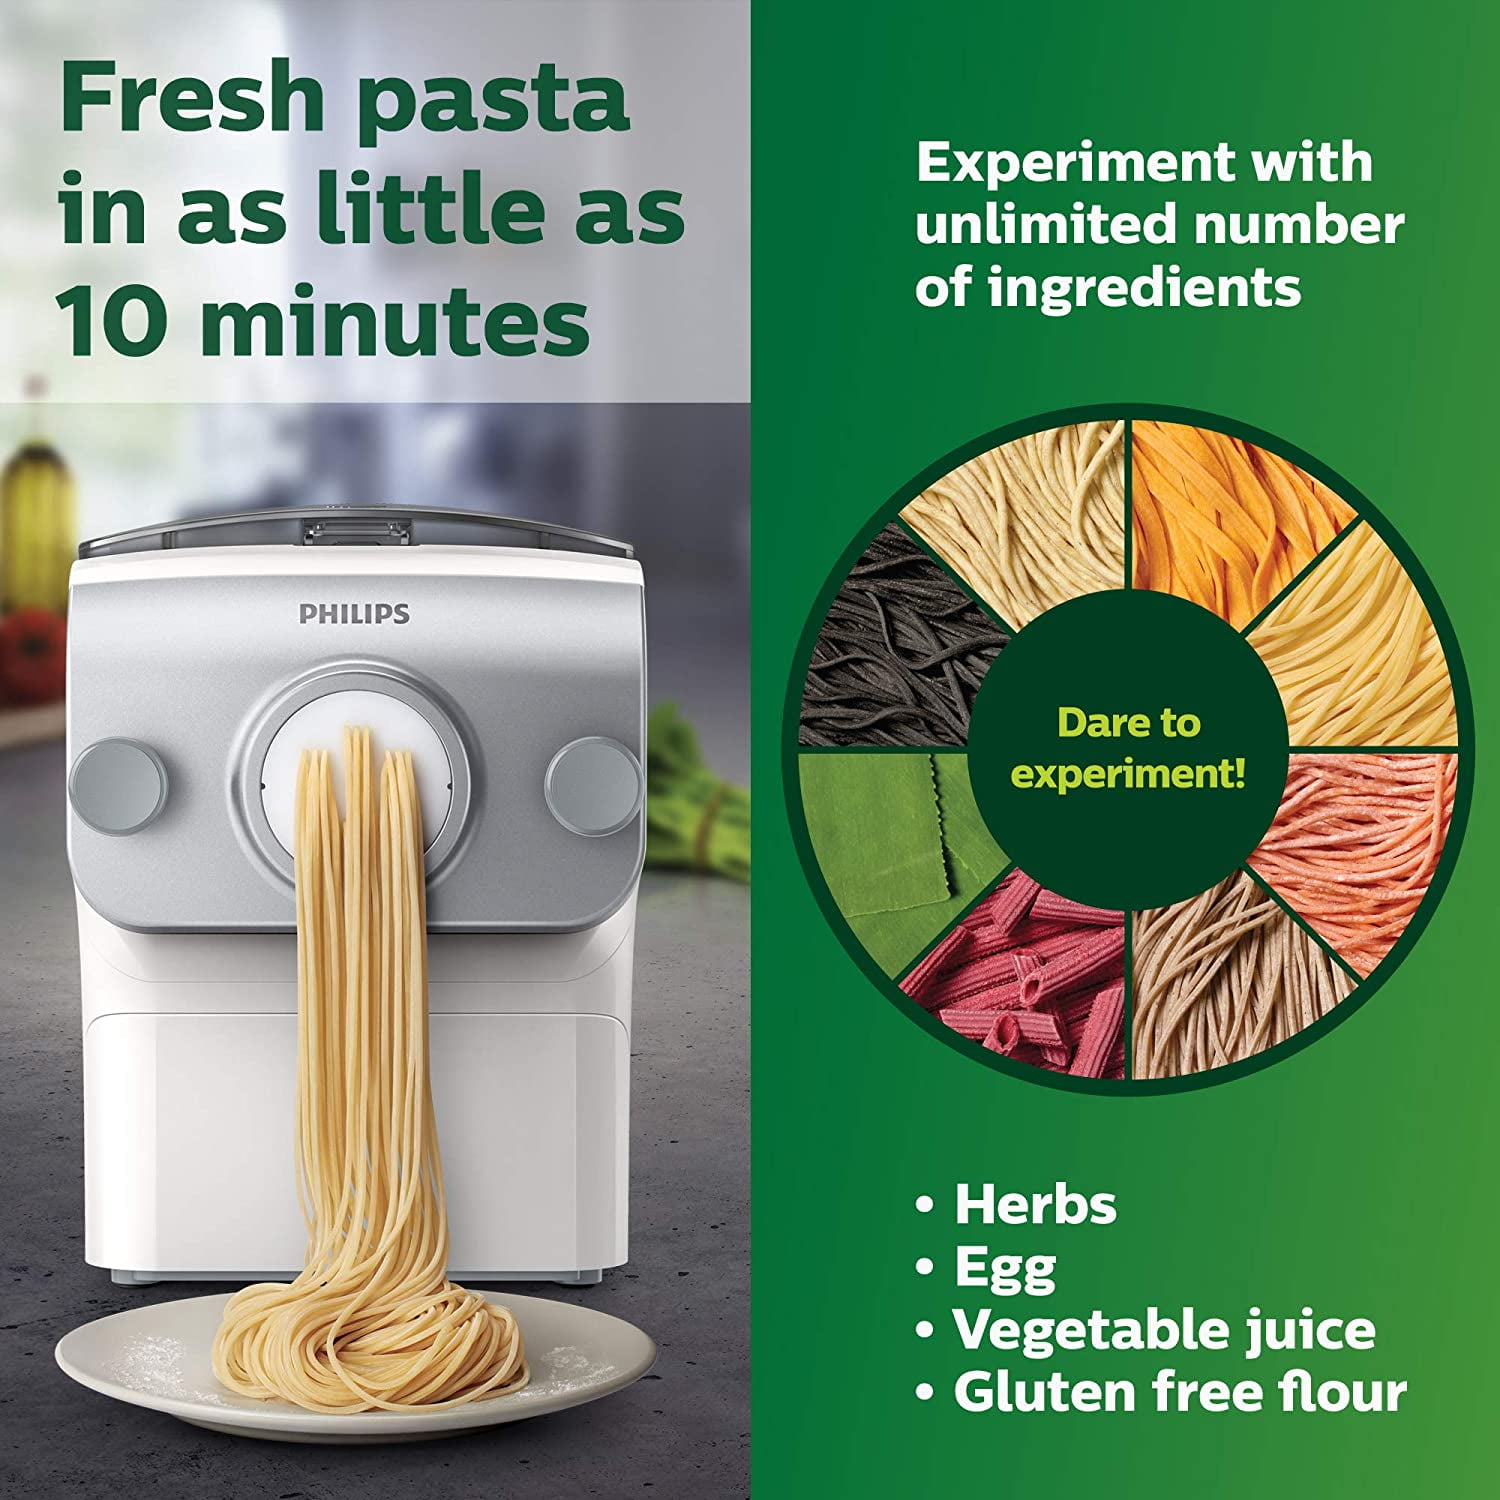 New Philips Avance Collection Pasta and Noodle Maker Plus w/ 8 Pasta  Shaping Discs, White - HR2378/06 